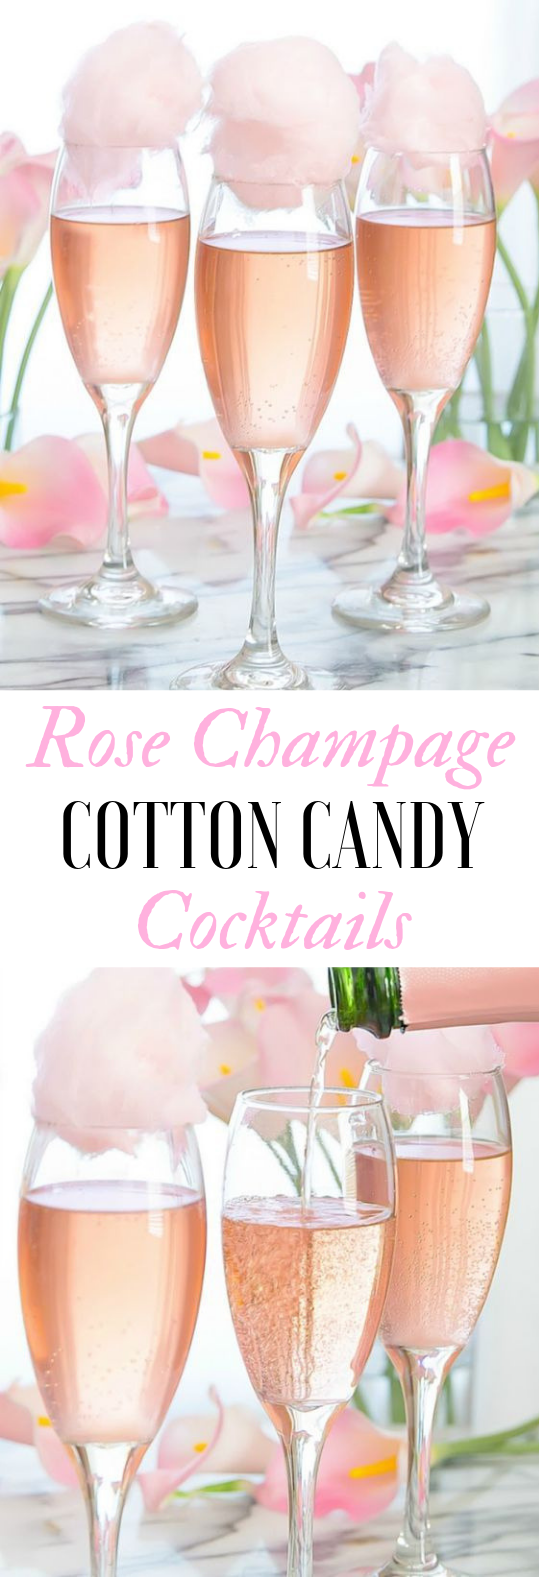 COTTON CANDY CHAMPAGNE COCKTAILS #Cocktail #Drinks